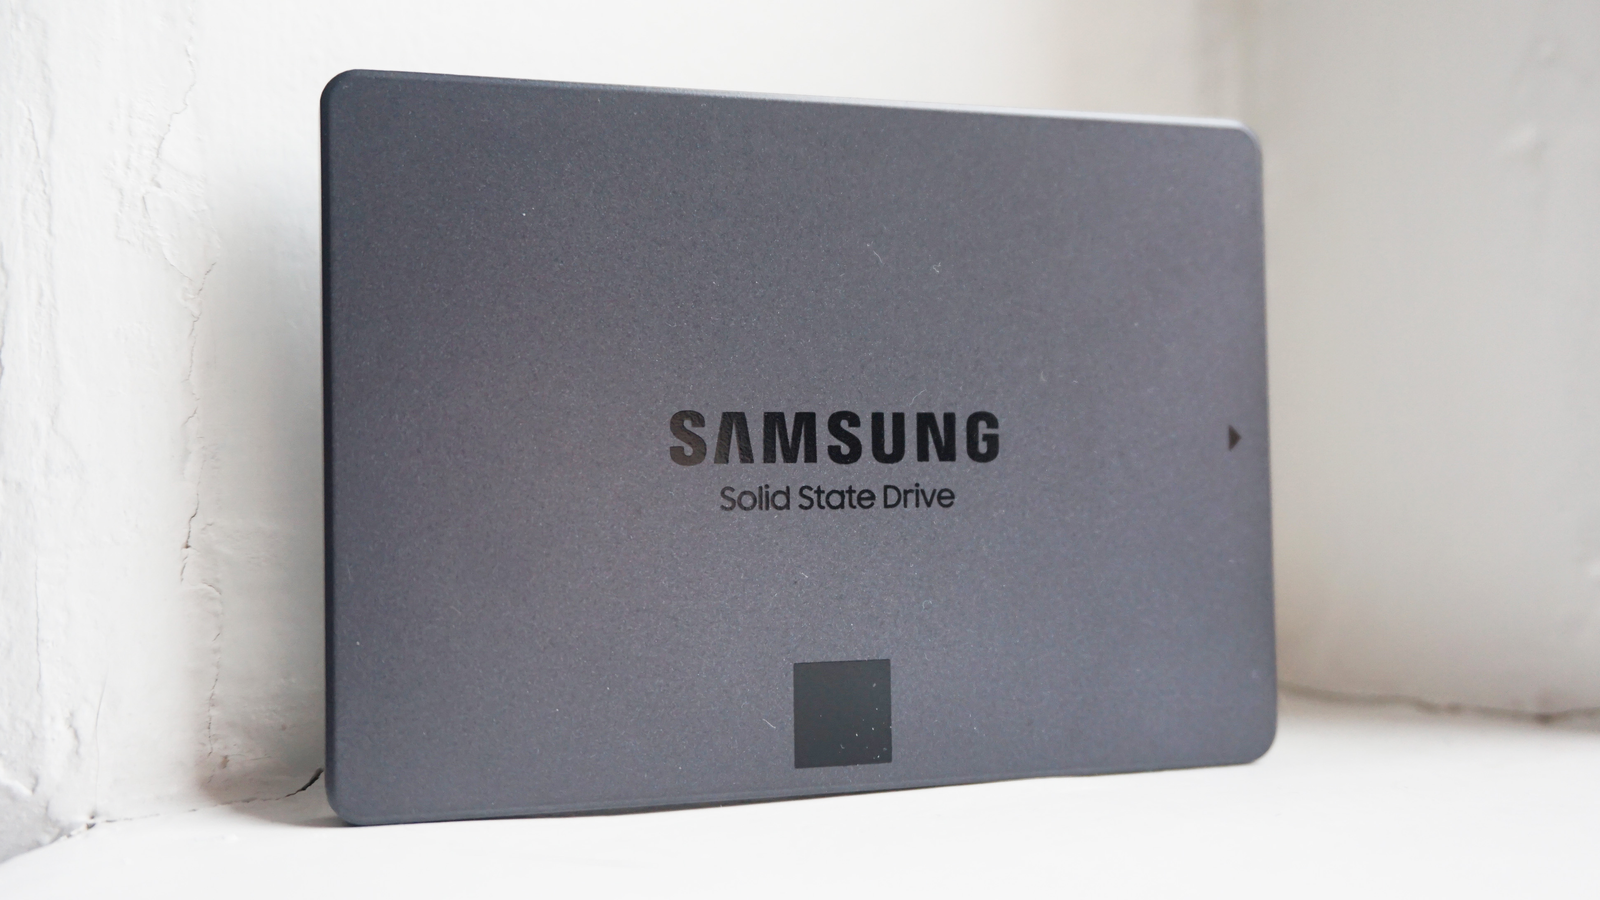 Samsung 860 Qvo review: fast, high-capacity SSD that's excellent value | Rock Paper Shotgun